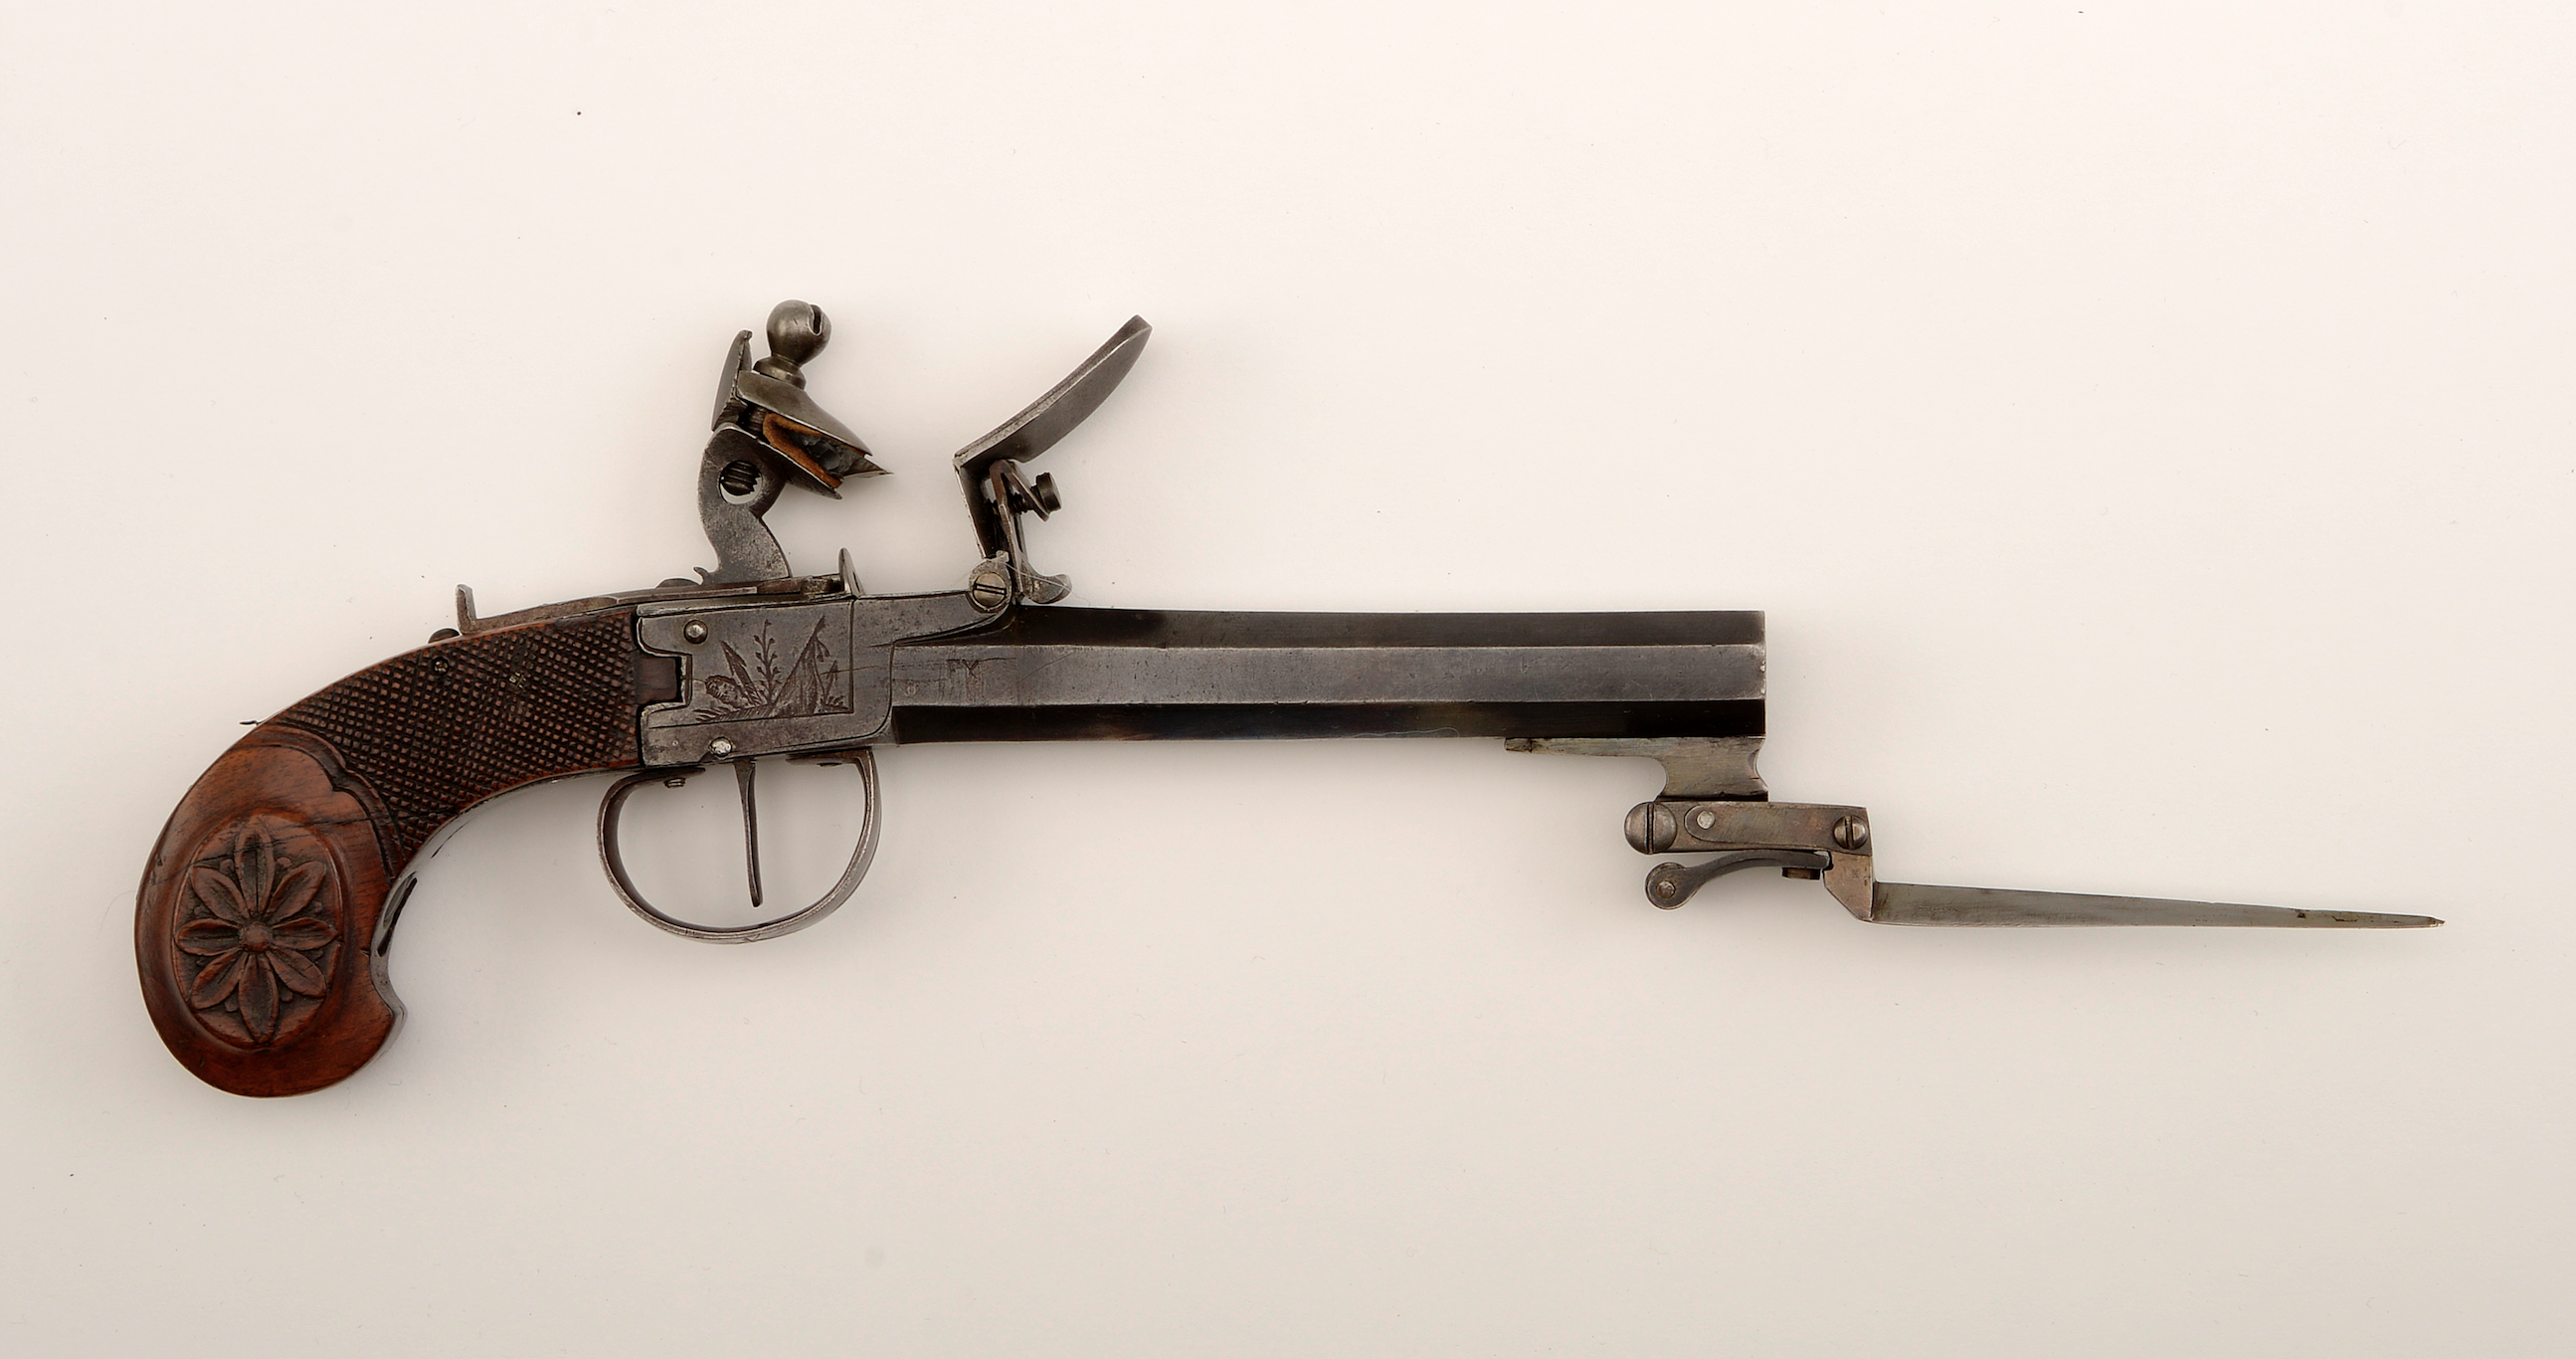 This English dagger flintlock would be tough to carry in the front pocket of your bluejeans.